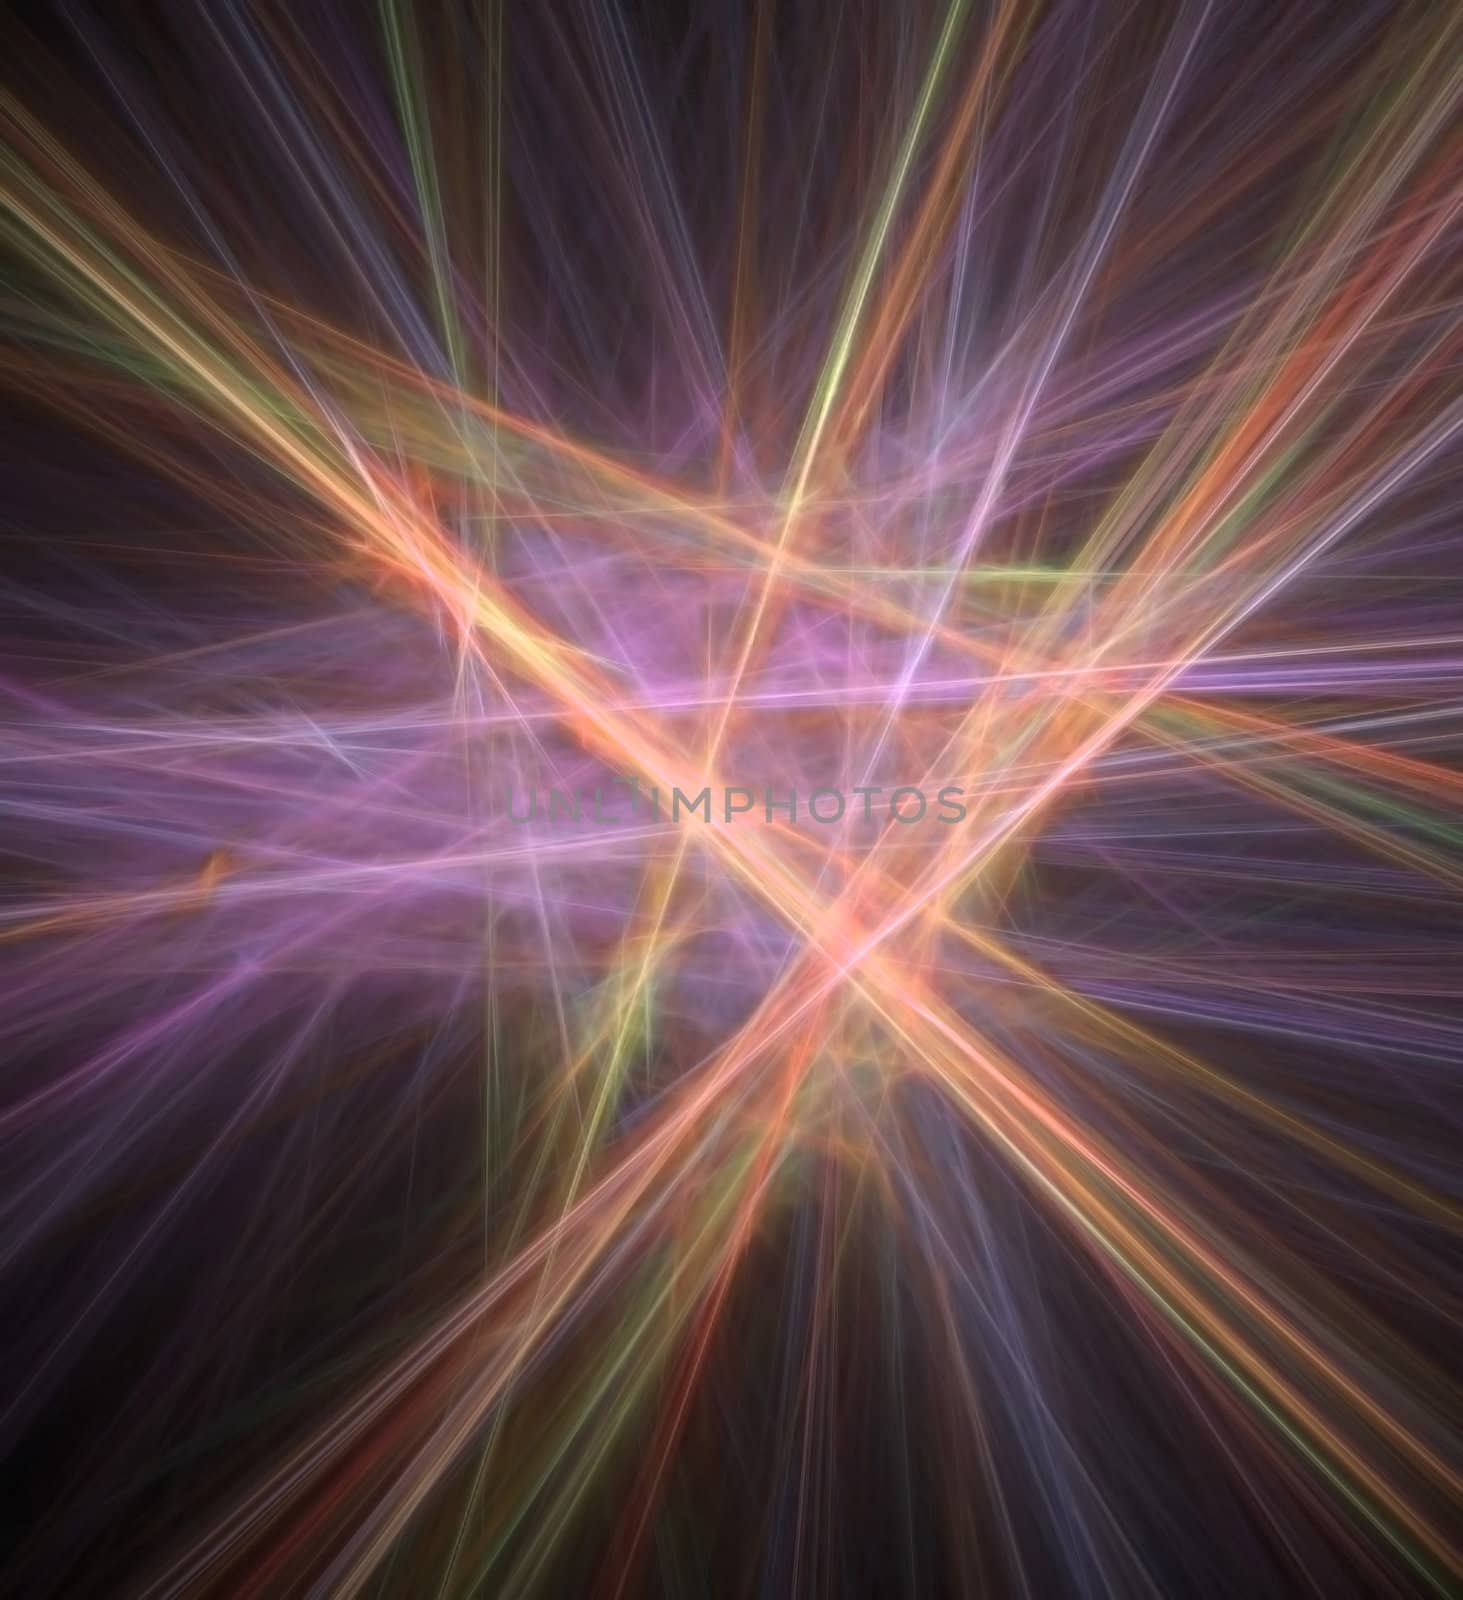 Colorful glowing fractal design - a great abstract background.